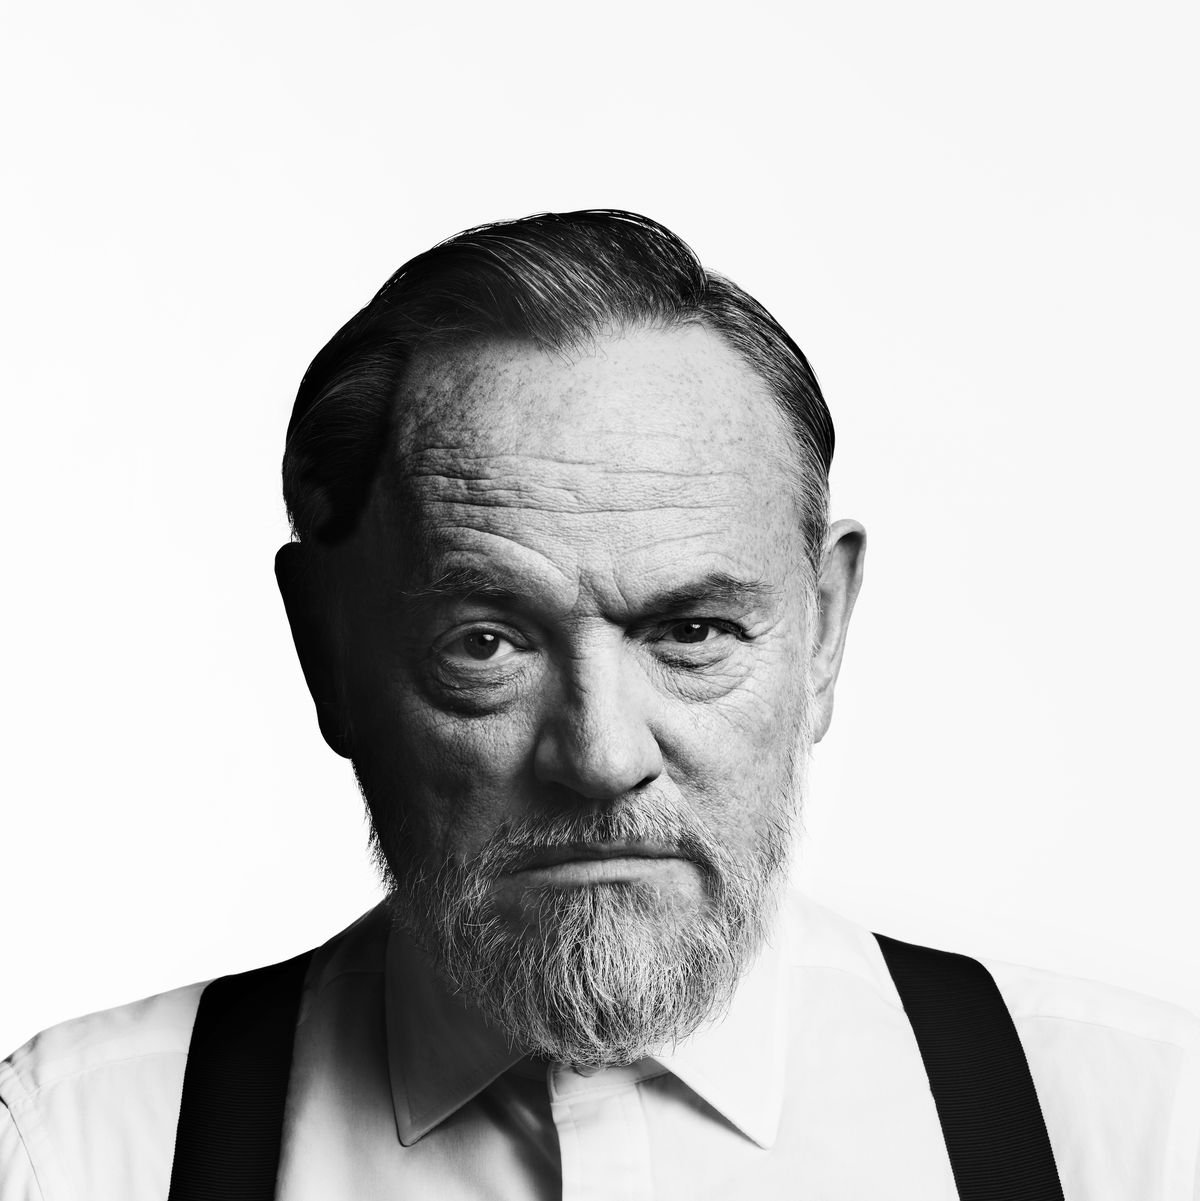 jared harris photographed by dean chalkley for the homecoming presented by the young vic